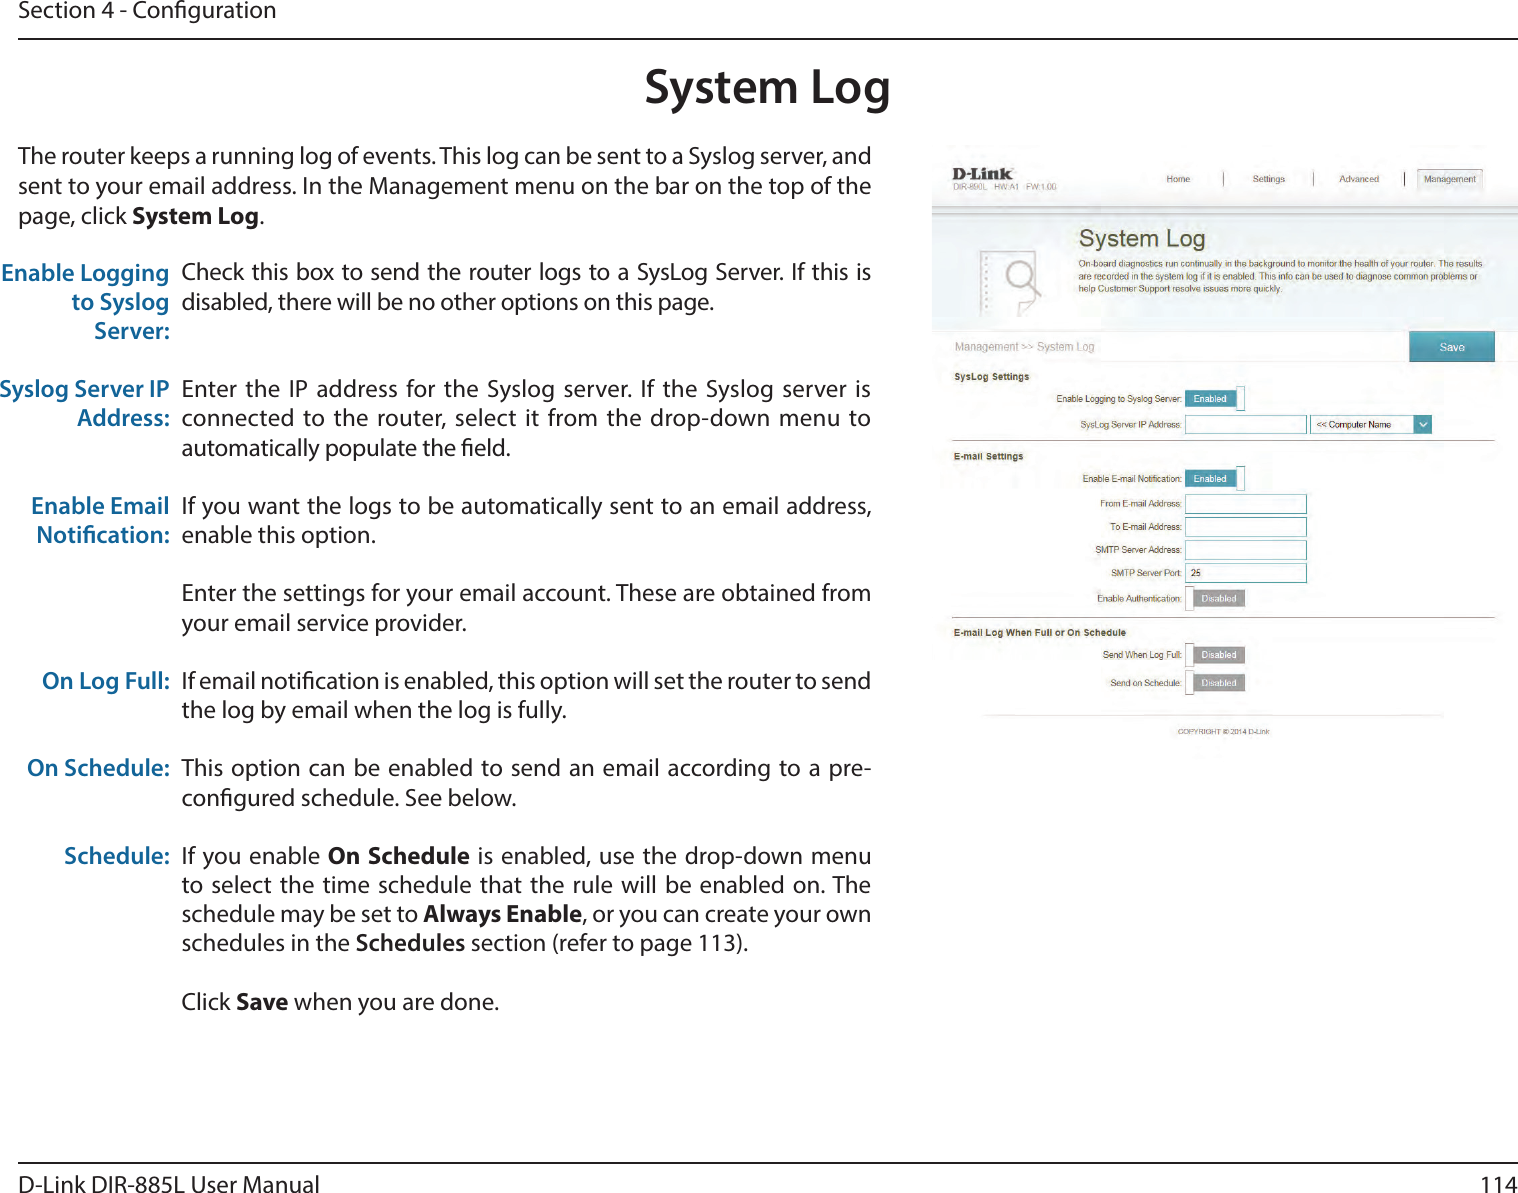 114D-Link DIR-885L User ManualSection 4 - CongurationSystem LogCheck this box to send the router logs to a SysLog Server. If this is disabled, there will be no other options on this page.Enter the IP address for the Syslog server. If the Syslog server is connected to the router, select it from the drop-down menu to automatically populate the eld. If you want the logs to be automatically sent to an email address, enable this option.Enter the settings for your email account. These are obtained from your email service provider.If email notication is enabled, this option will set the router to send the log by email when the log is fully.This option can be enabled to send an email according to a pre-congured schedule. See below.If you enable On Schedule is enabled, use the drop-down menu to select the time schedule that the rule will be enabled on. The schedule may be set to Always Enable, or you can create your own schedules in the Schedules section (refer to page 113).Click Save when you are done.Enable Logging to Syslog Server:Syslog Server IP Address:Enable Email Notication:On Log Full:On Schedule:Schedule:The router keeps a running log of events. This log can be sent to a Syslog server, and sent to your email address. In the Management menu on the bar on the top of the page, click System Log. 